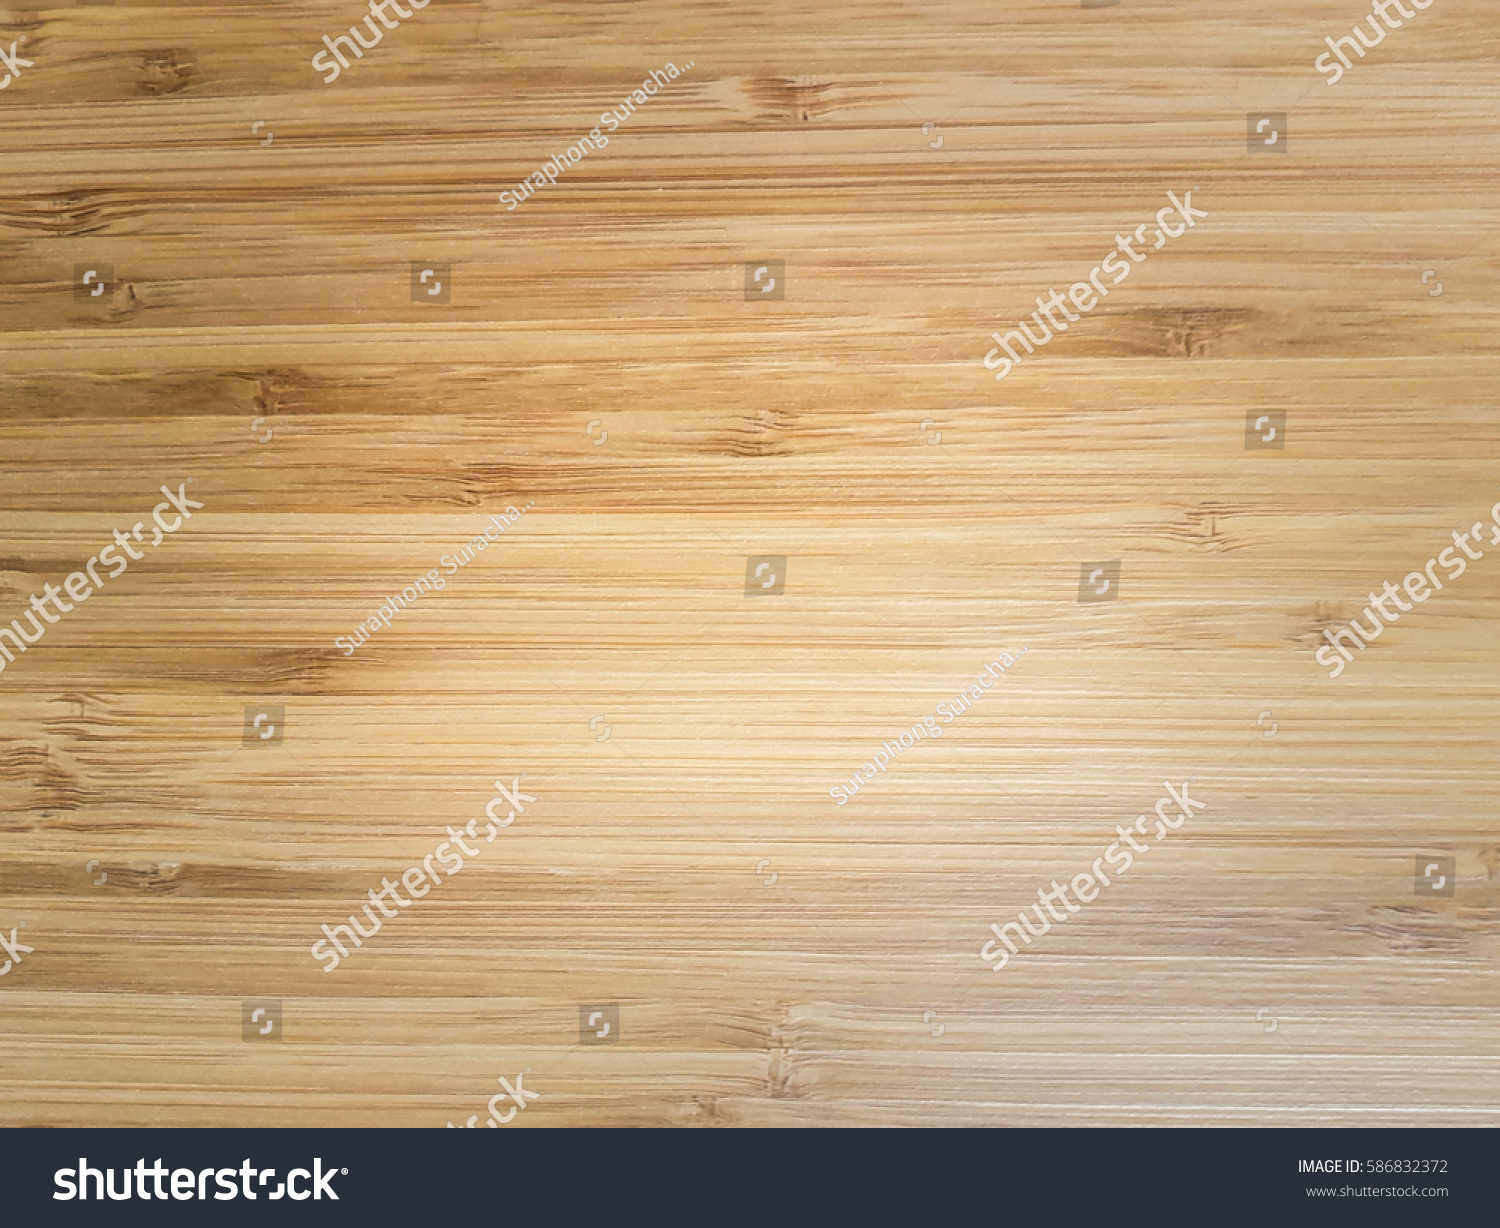 Edit Pictures Free Online - wooden wall | Shutterstock Editor